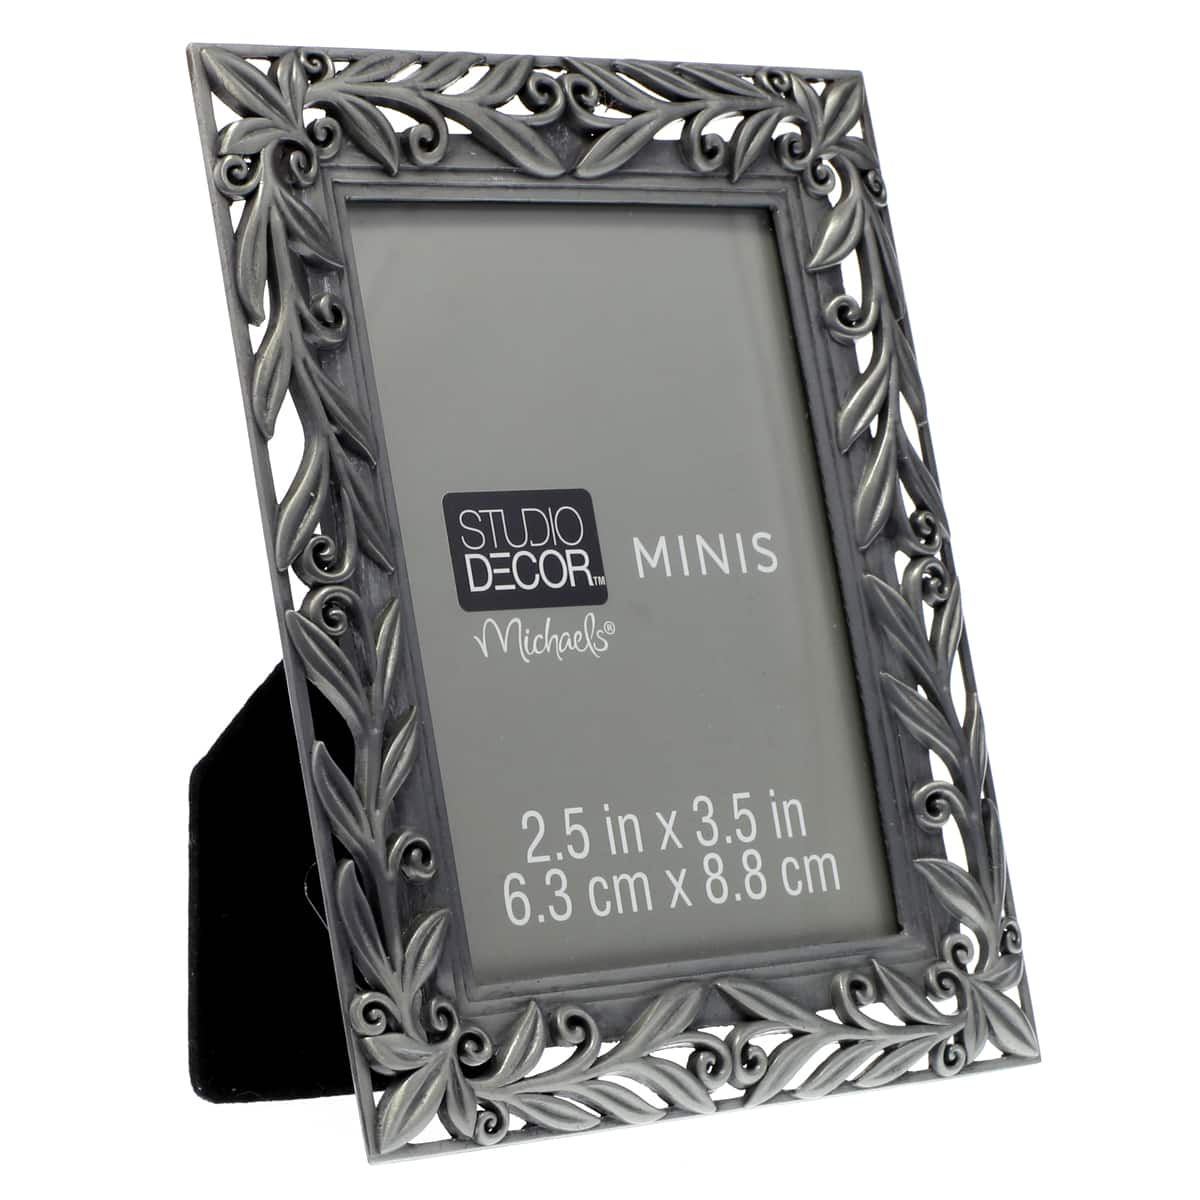 BE QUICK!! Frame Silver 12.5 x10cm for 2x3" photo.BUY 1 OR THE LAST 4 Bulk $$ 